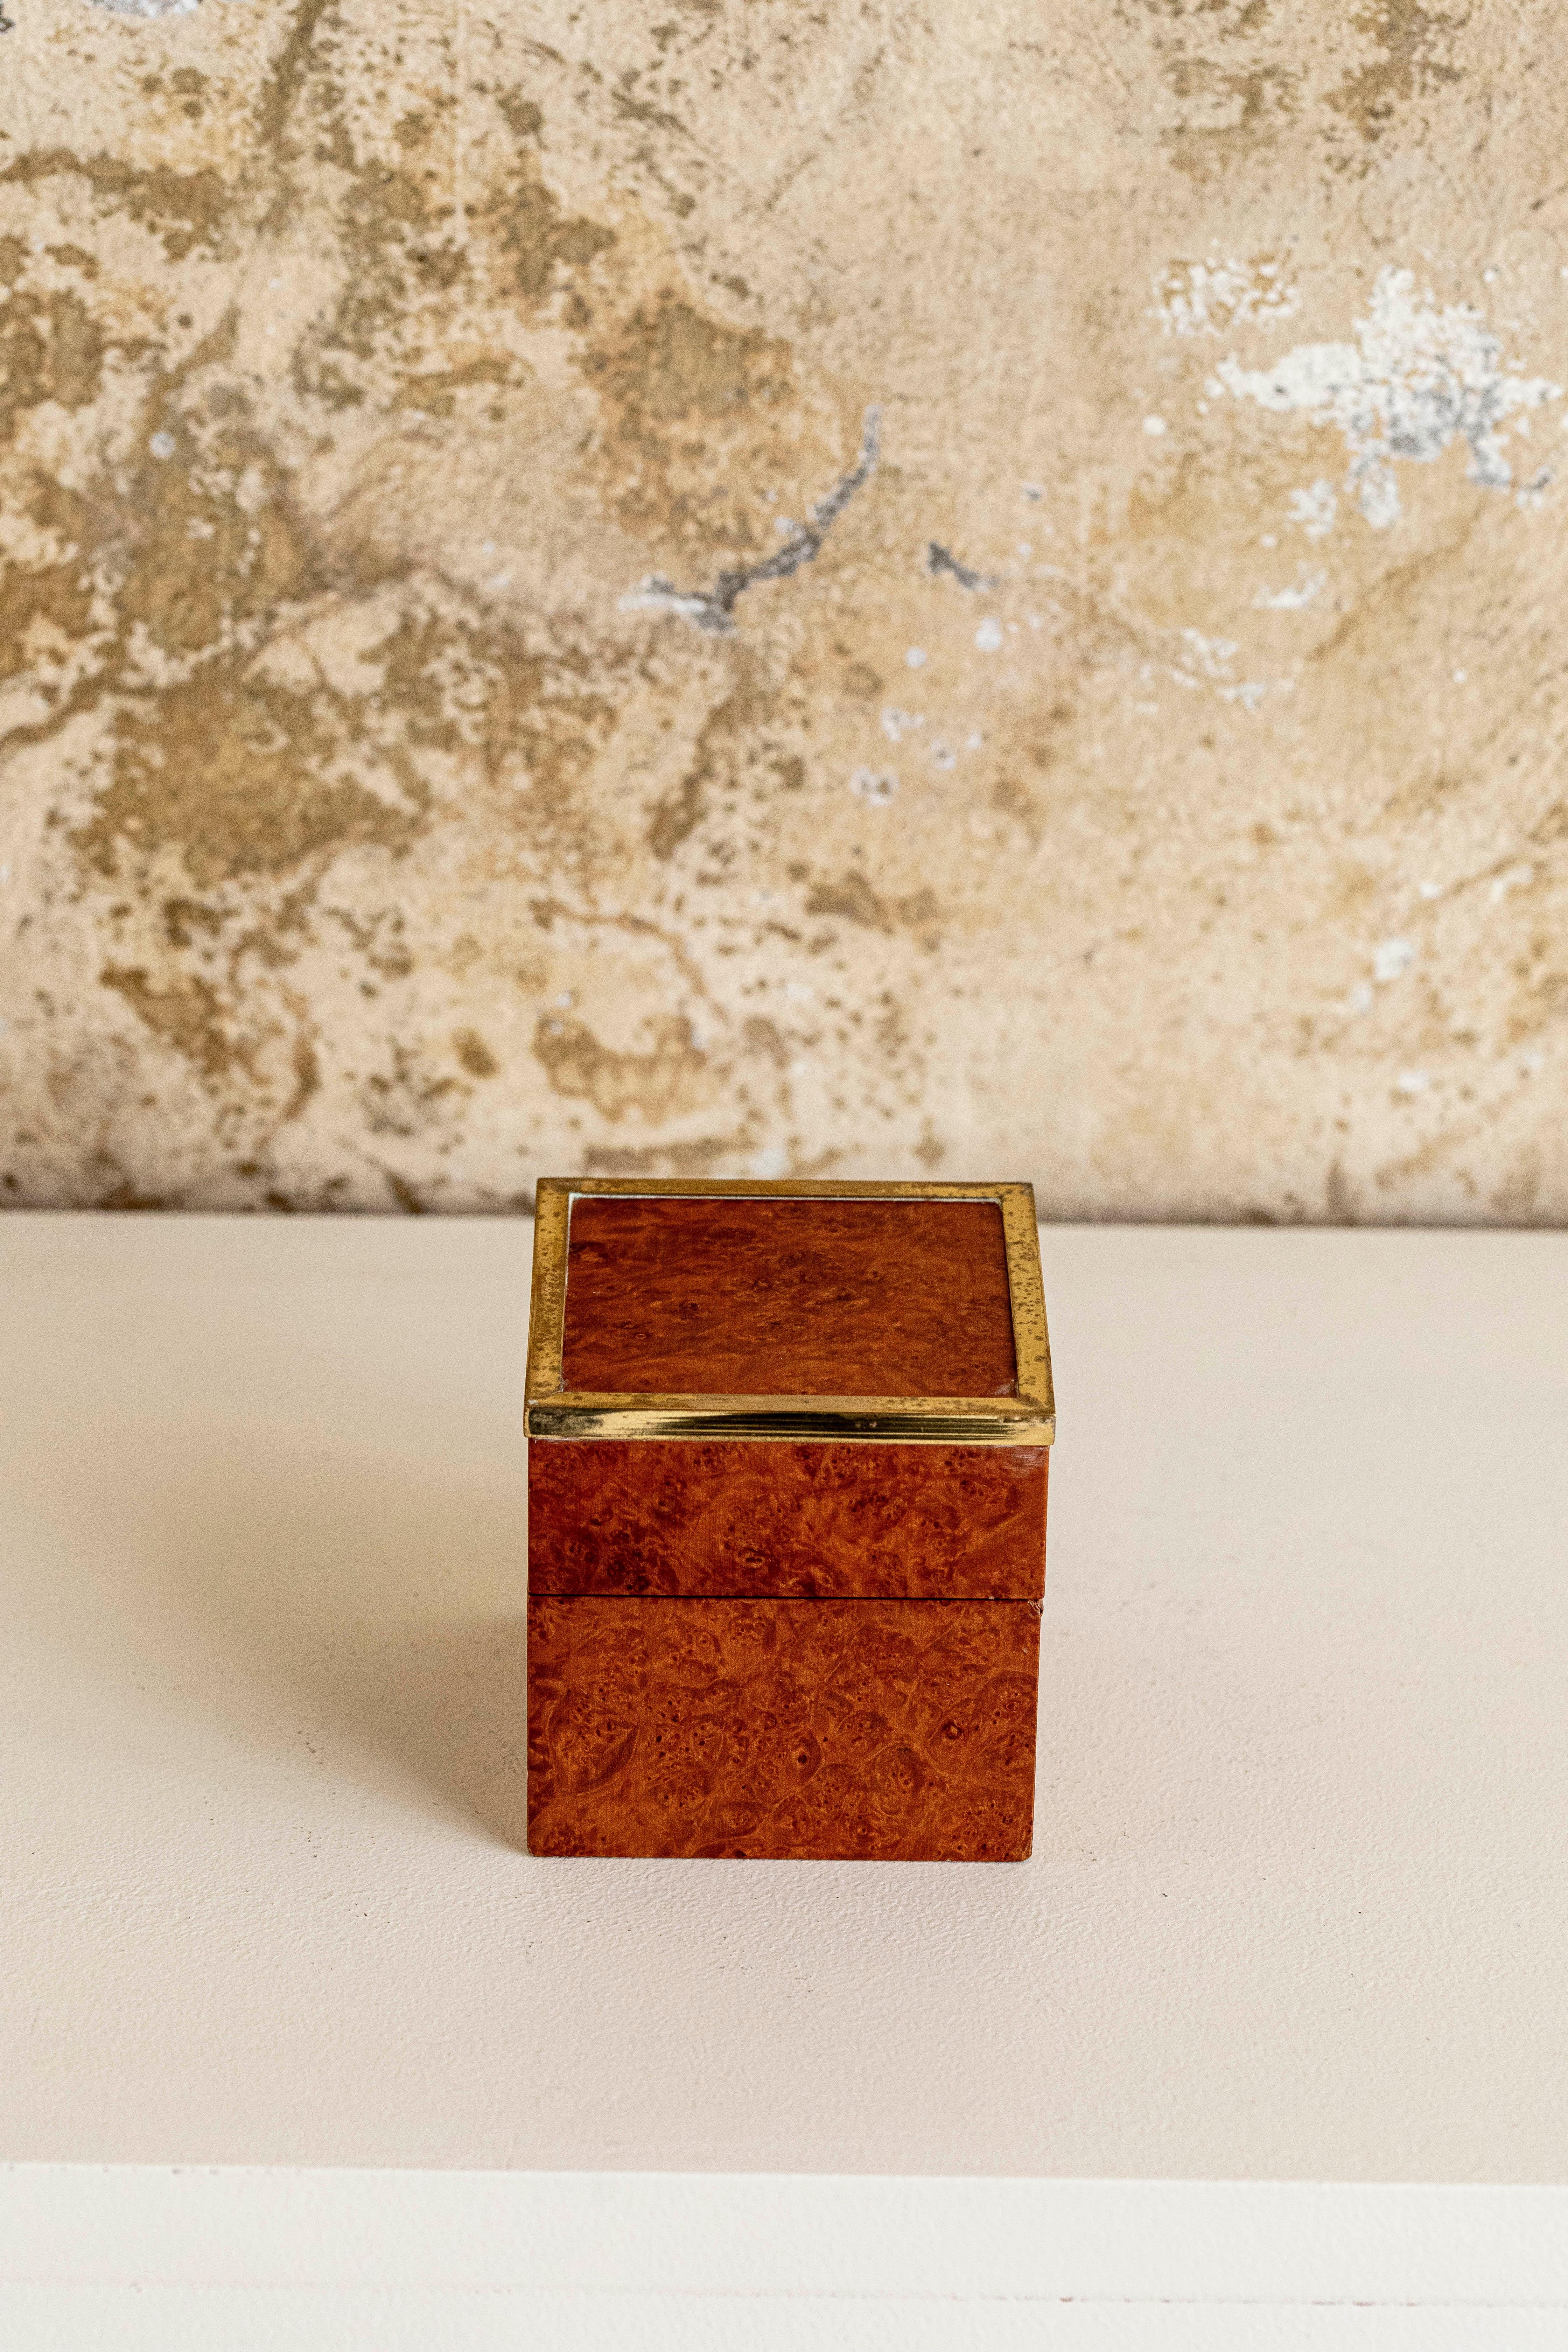 Box designed by Gabriella Crespi
Wooden and golden brass box by Gabriella Crespi. 
Recorded by Archivio Gabriella Crespi, Milan. 
Signed.

Italy 1970s